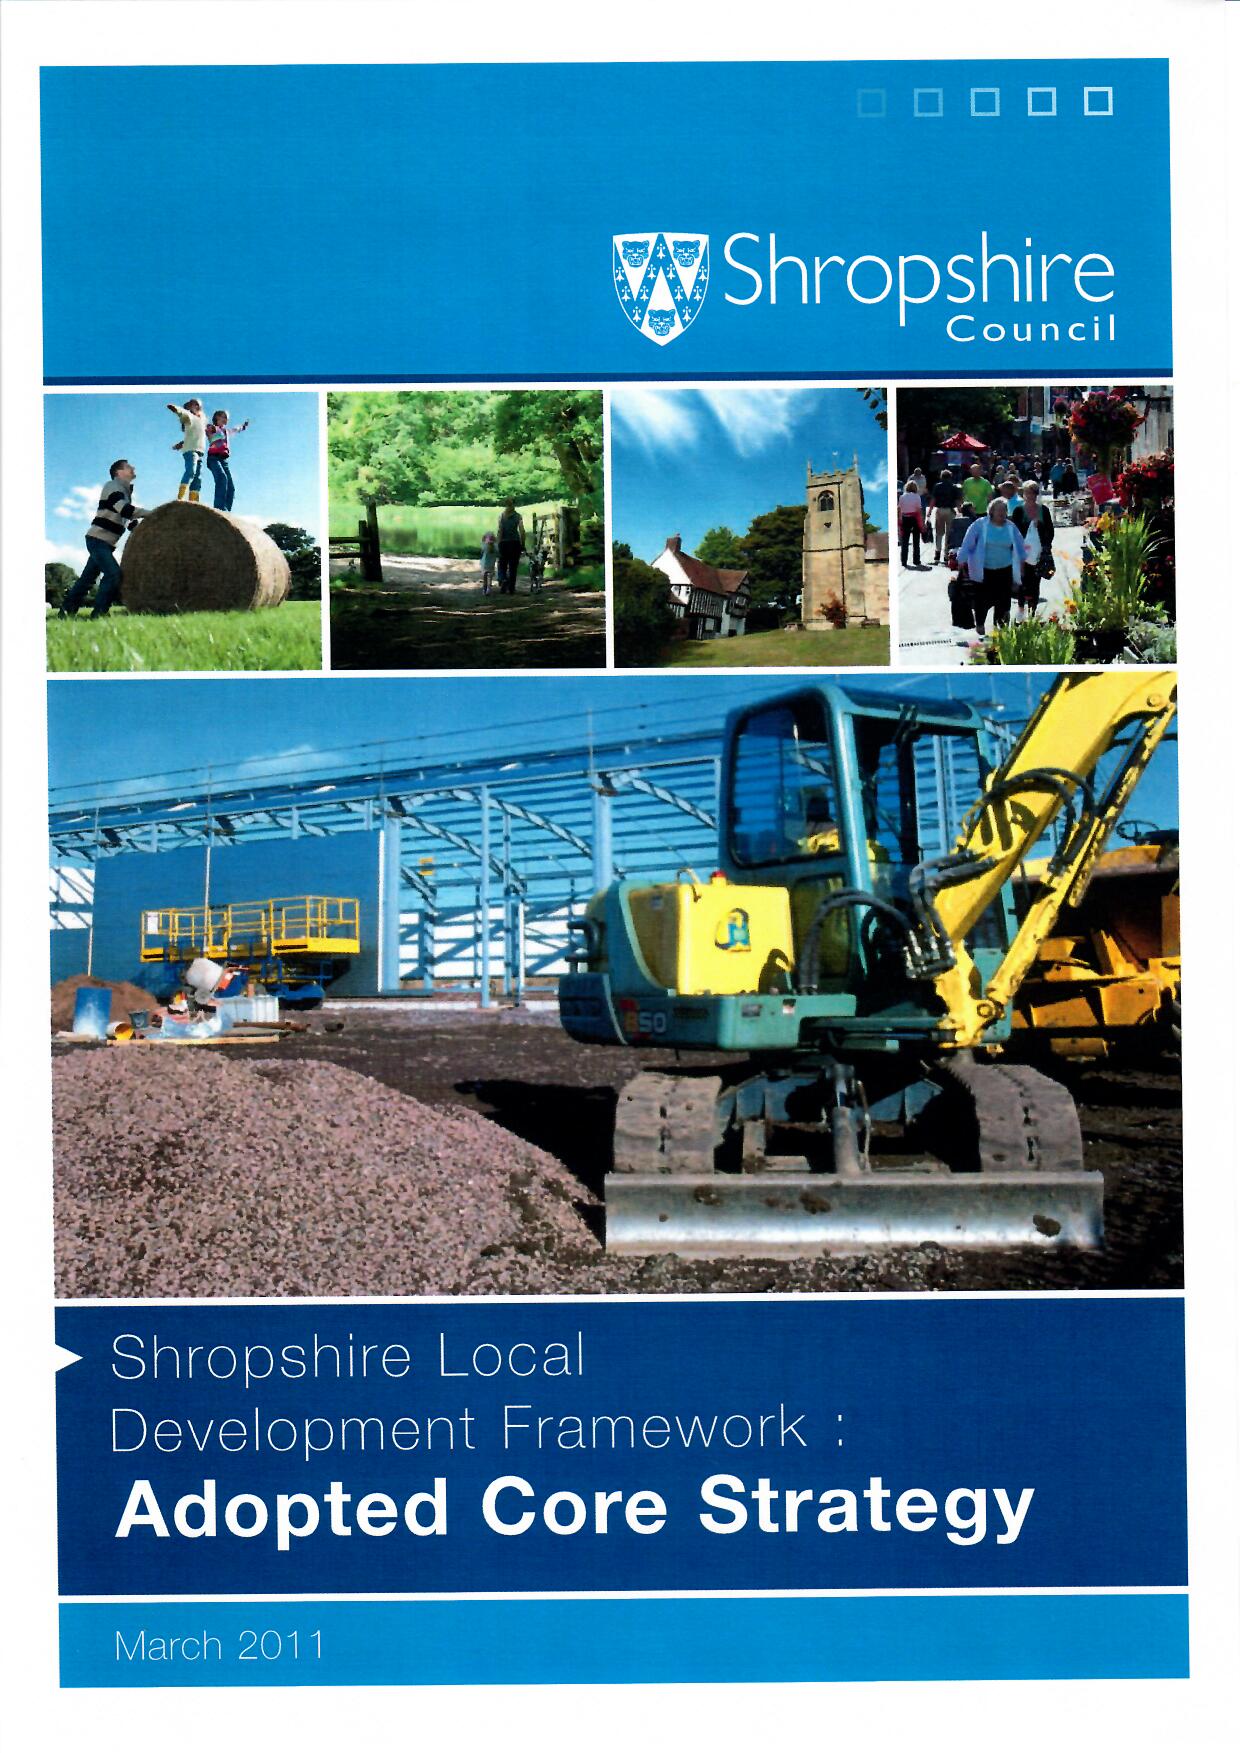 Shropshire Council's Adopted Core Strategy